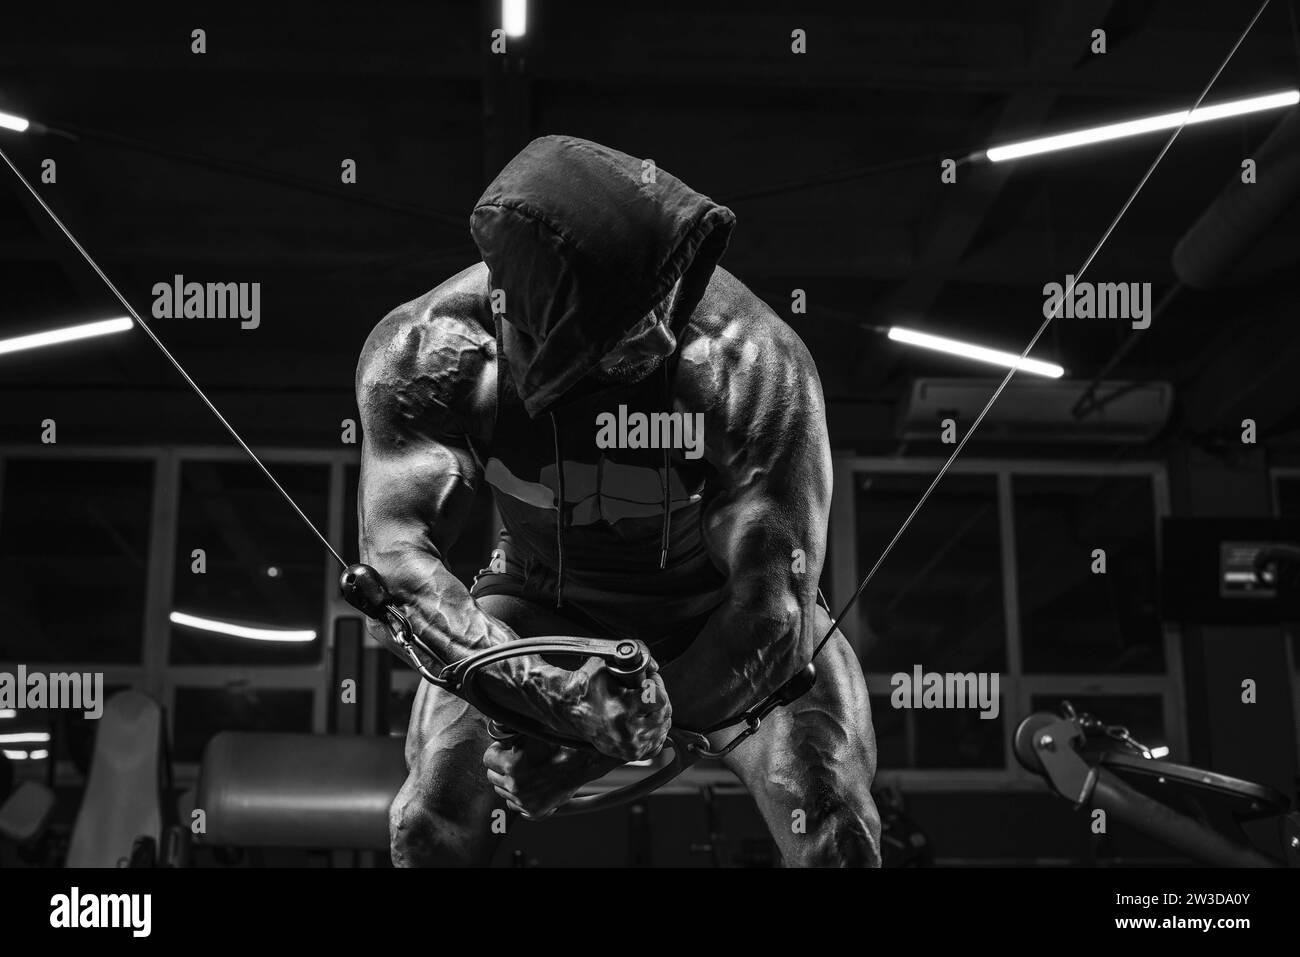 Image of a powerful athlete in a hoodie exercising in a crossover at the gym. Fitness and bodybuilding concept. Mixed media Stock Photo